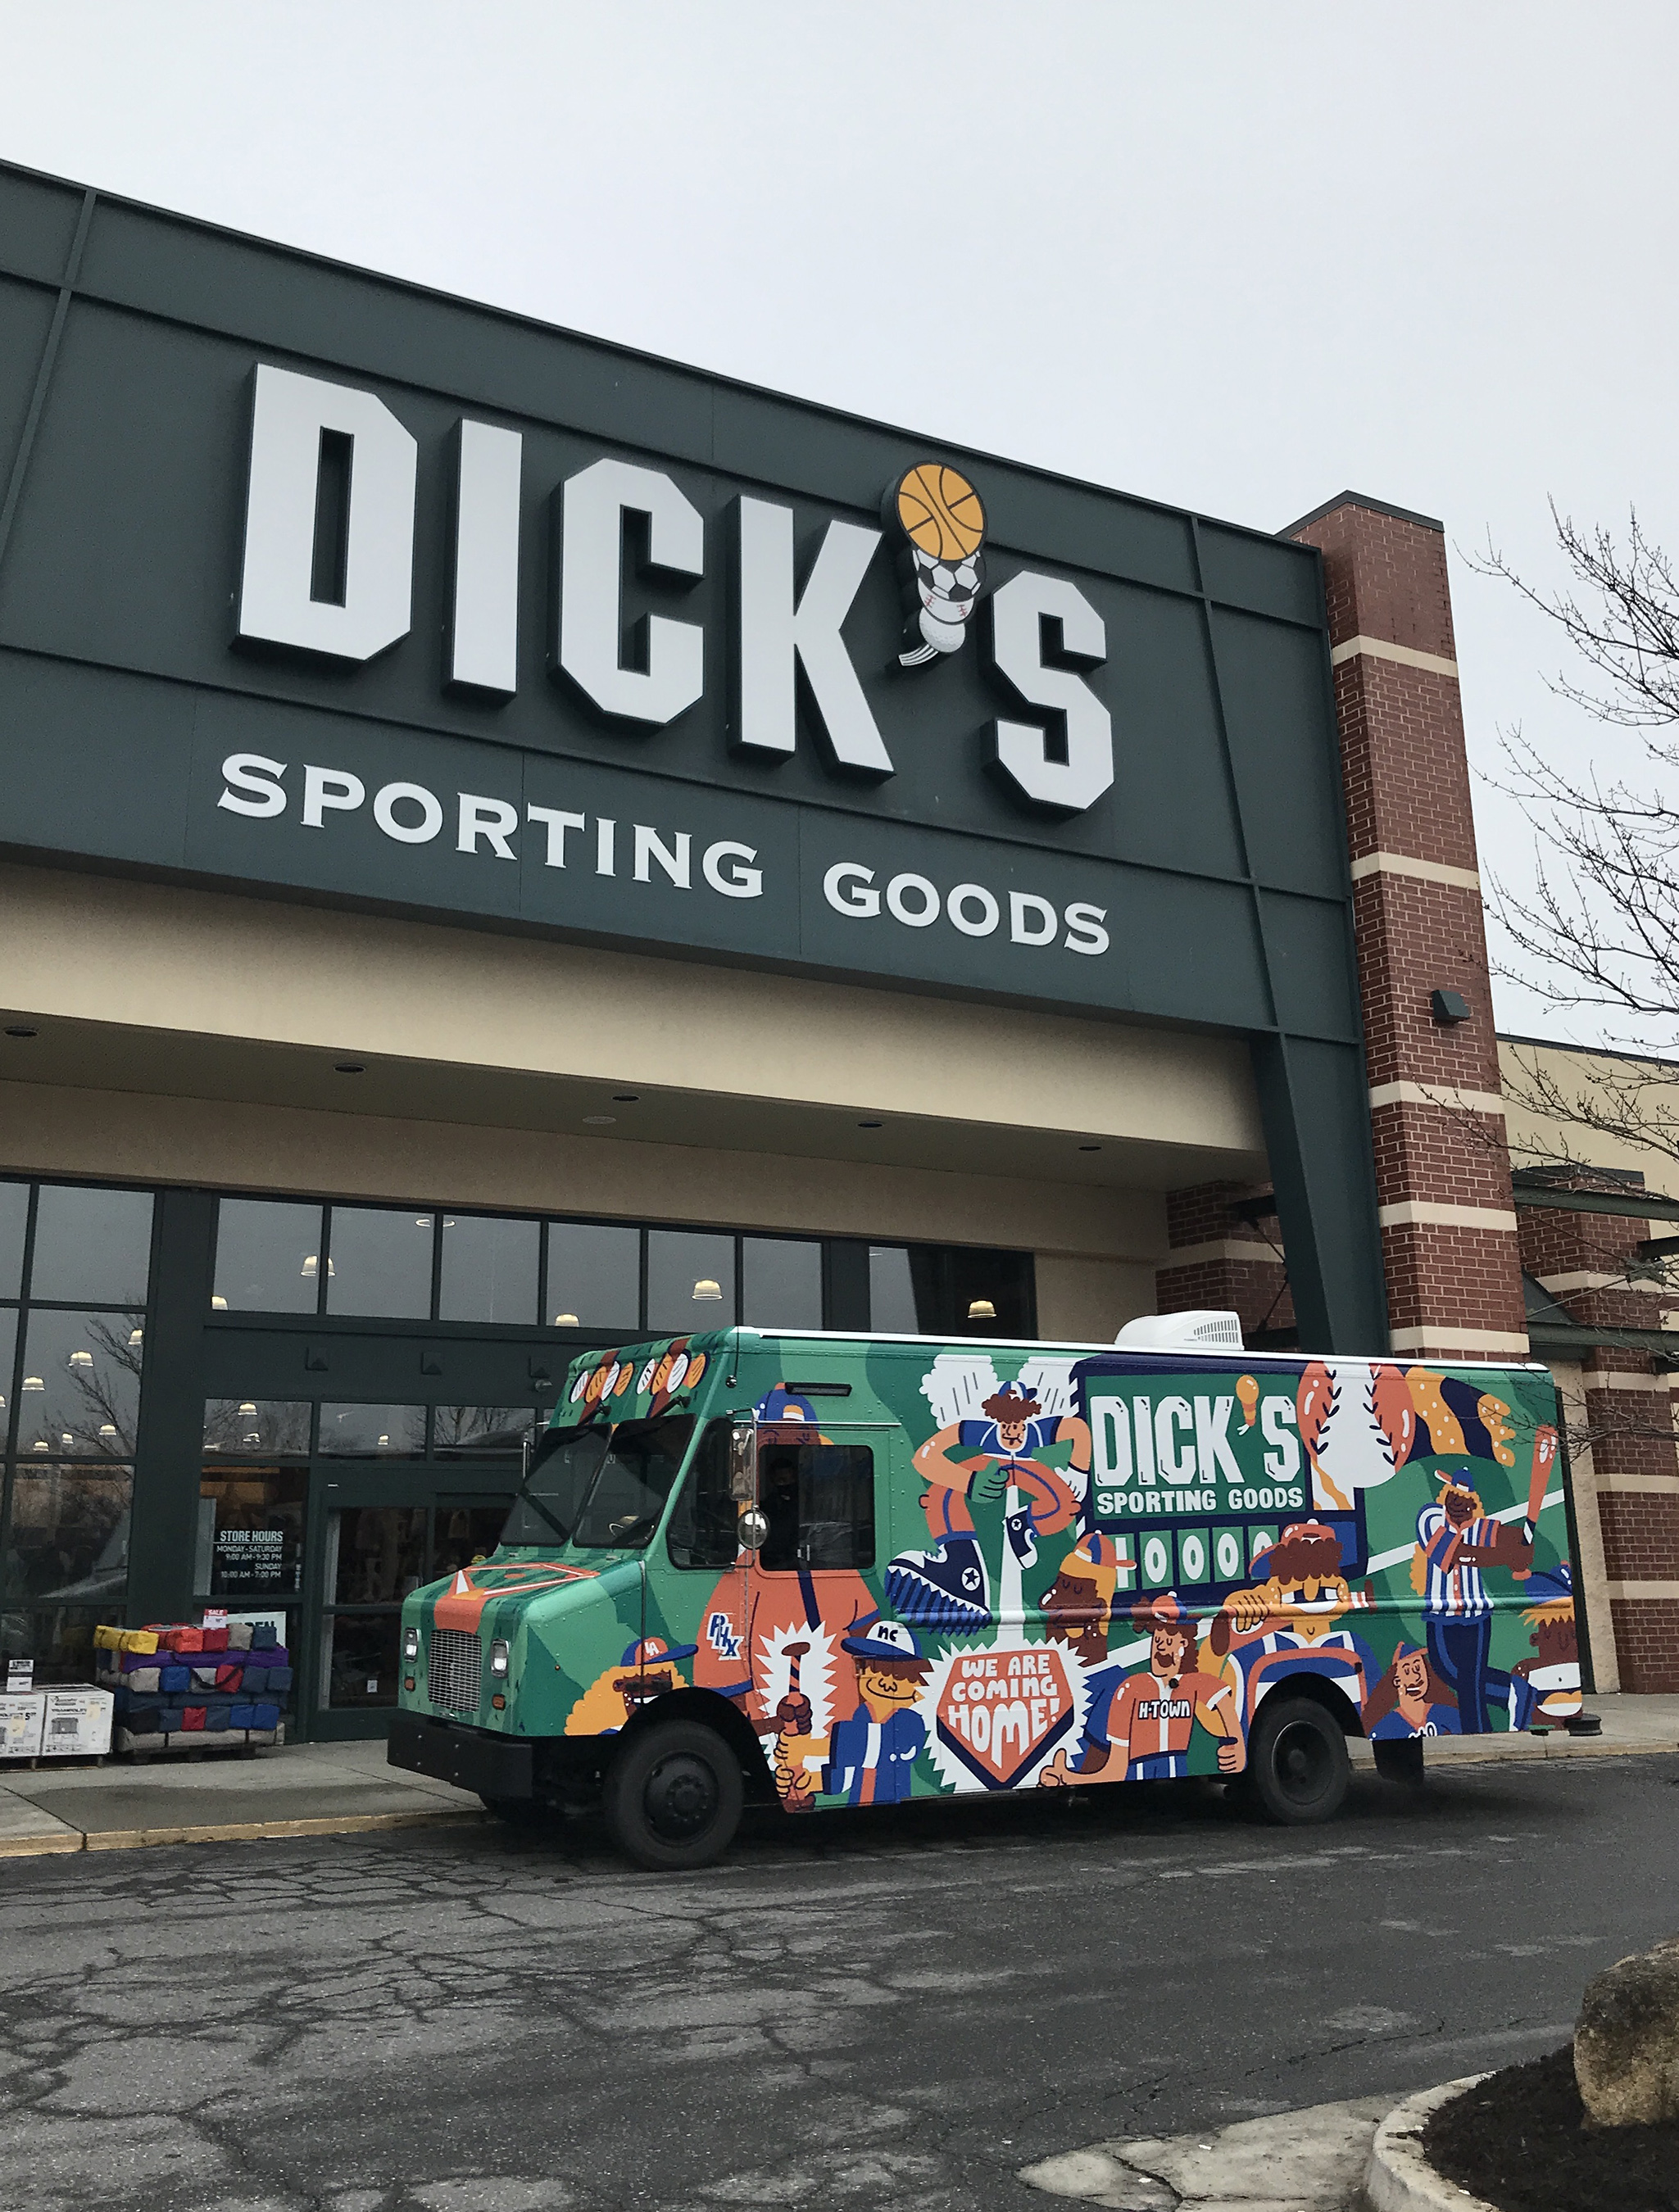 DICK’S Sporting Goods and The DICK’S Sporting Goods Foundation Provide Equipment To 10,000 Baseball and Softball Youth Athletes On 8-City Tour